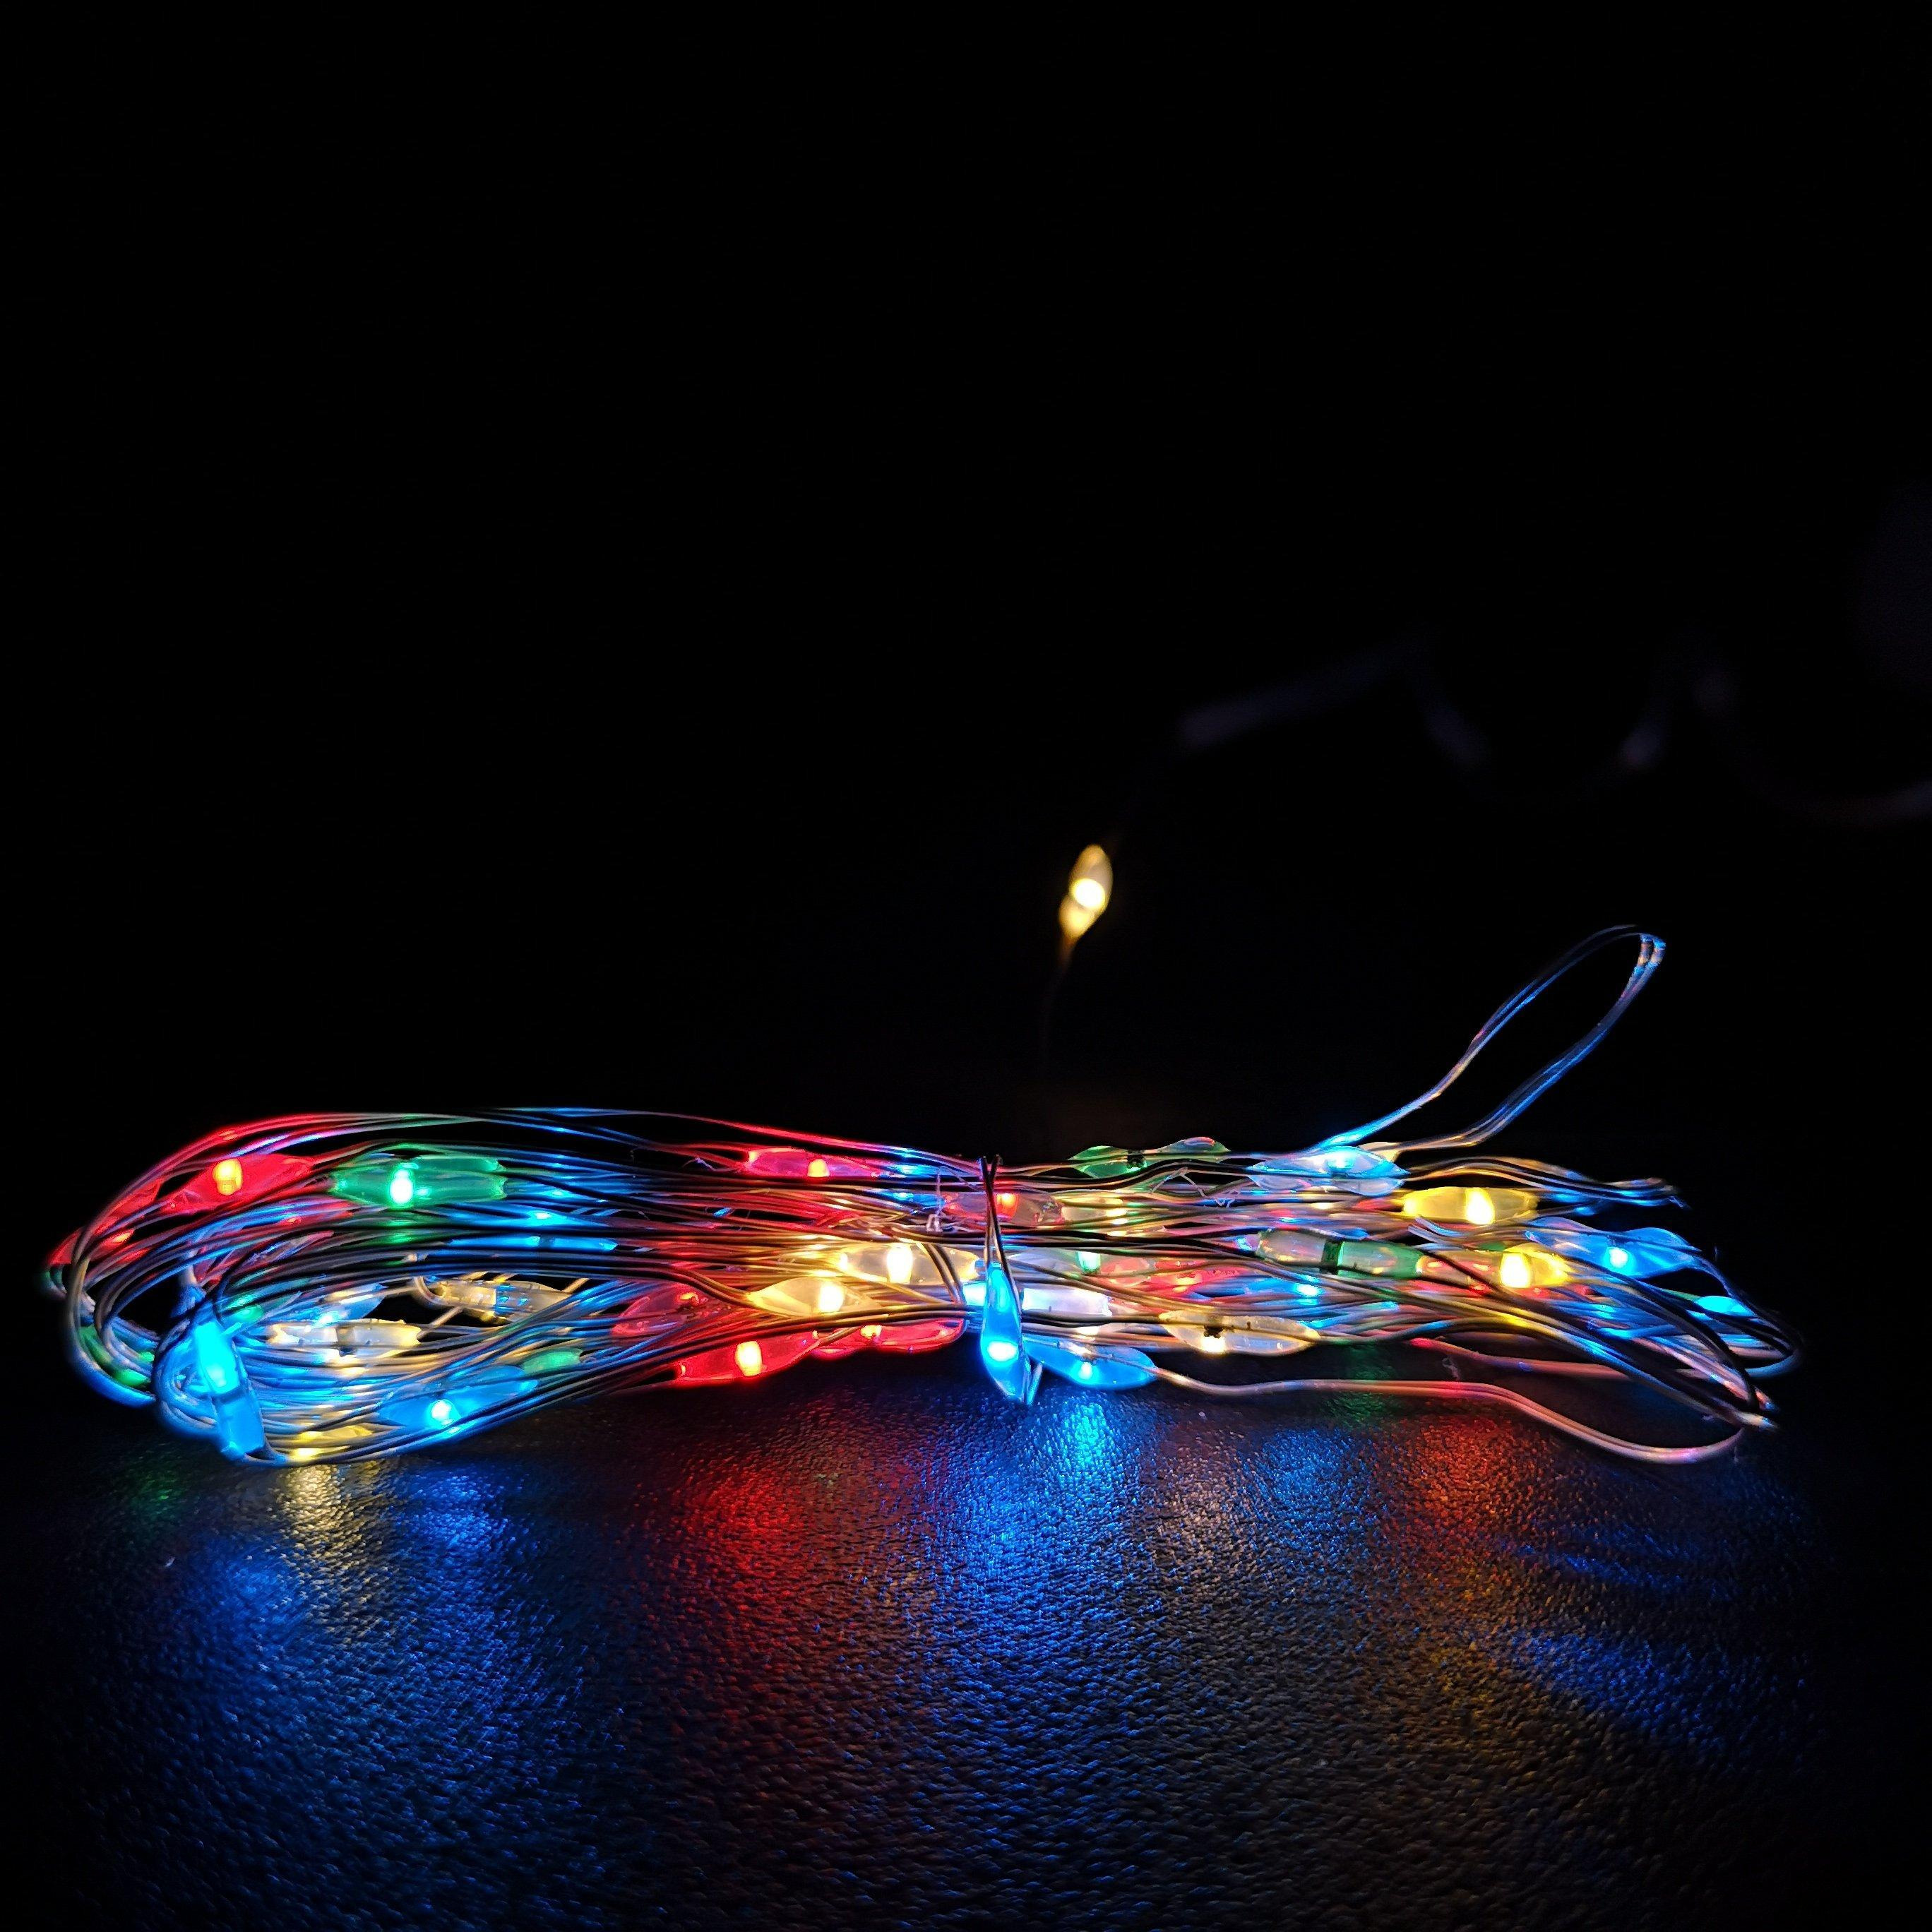 50 LED 2.5m Premier MicroBrights Indoor Outdoor Christmas Multi Function Battery Operated Lights with Timer on Pin Wire in Multicoloured - image 1